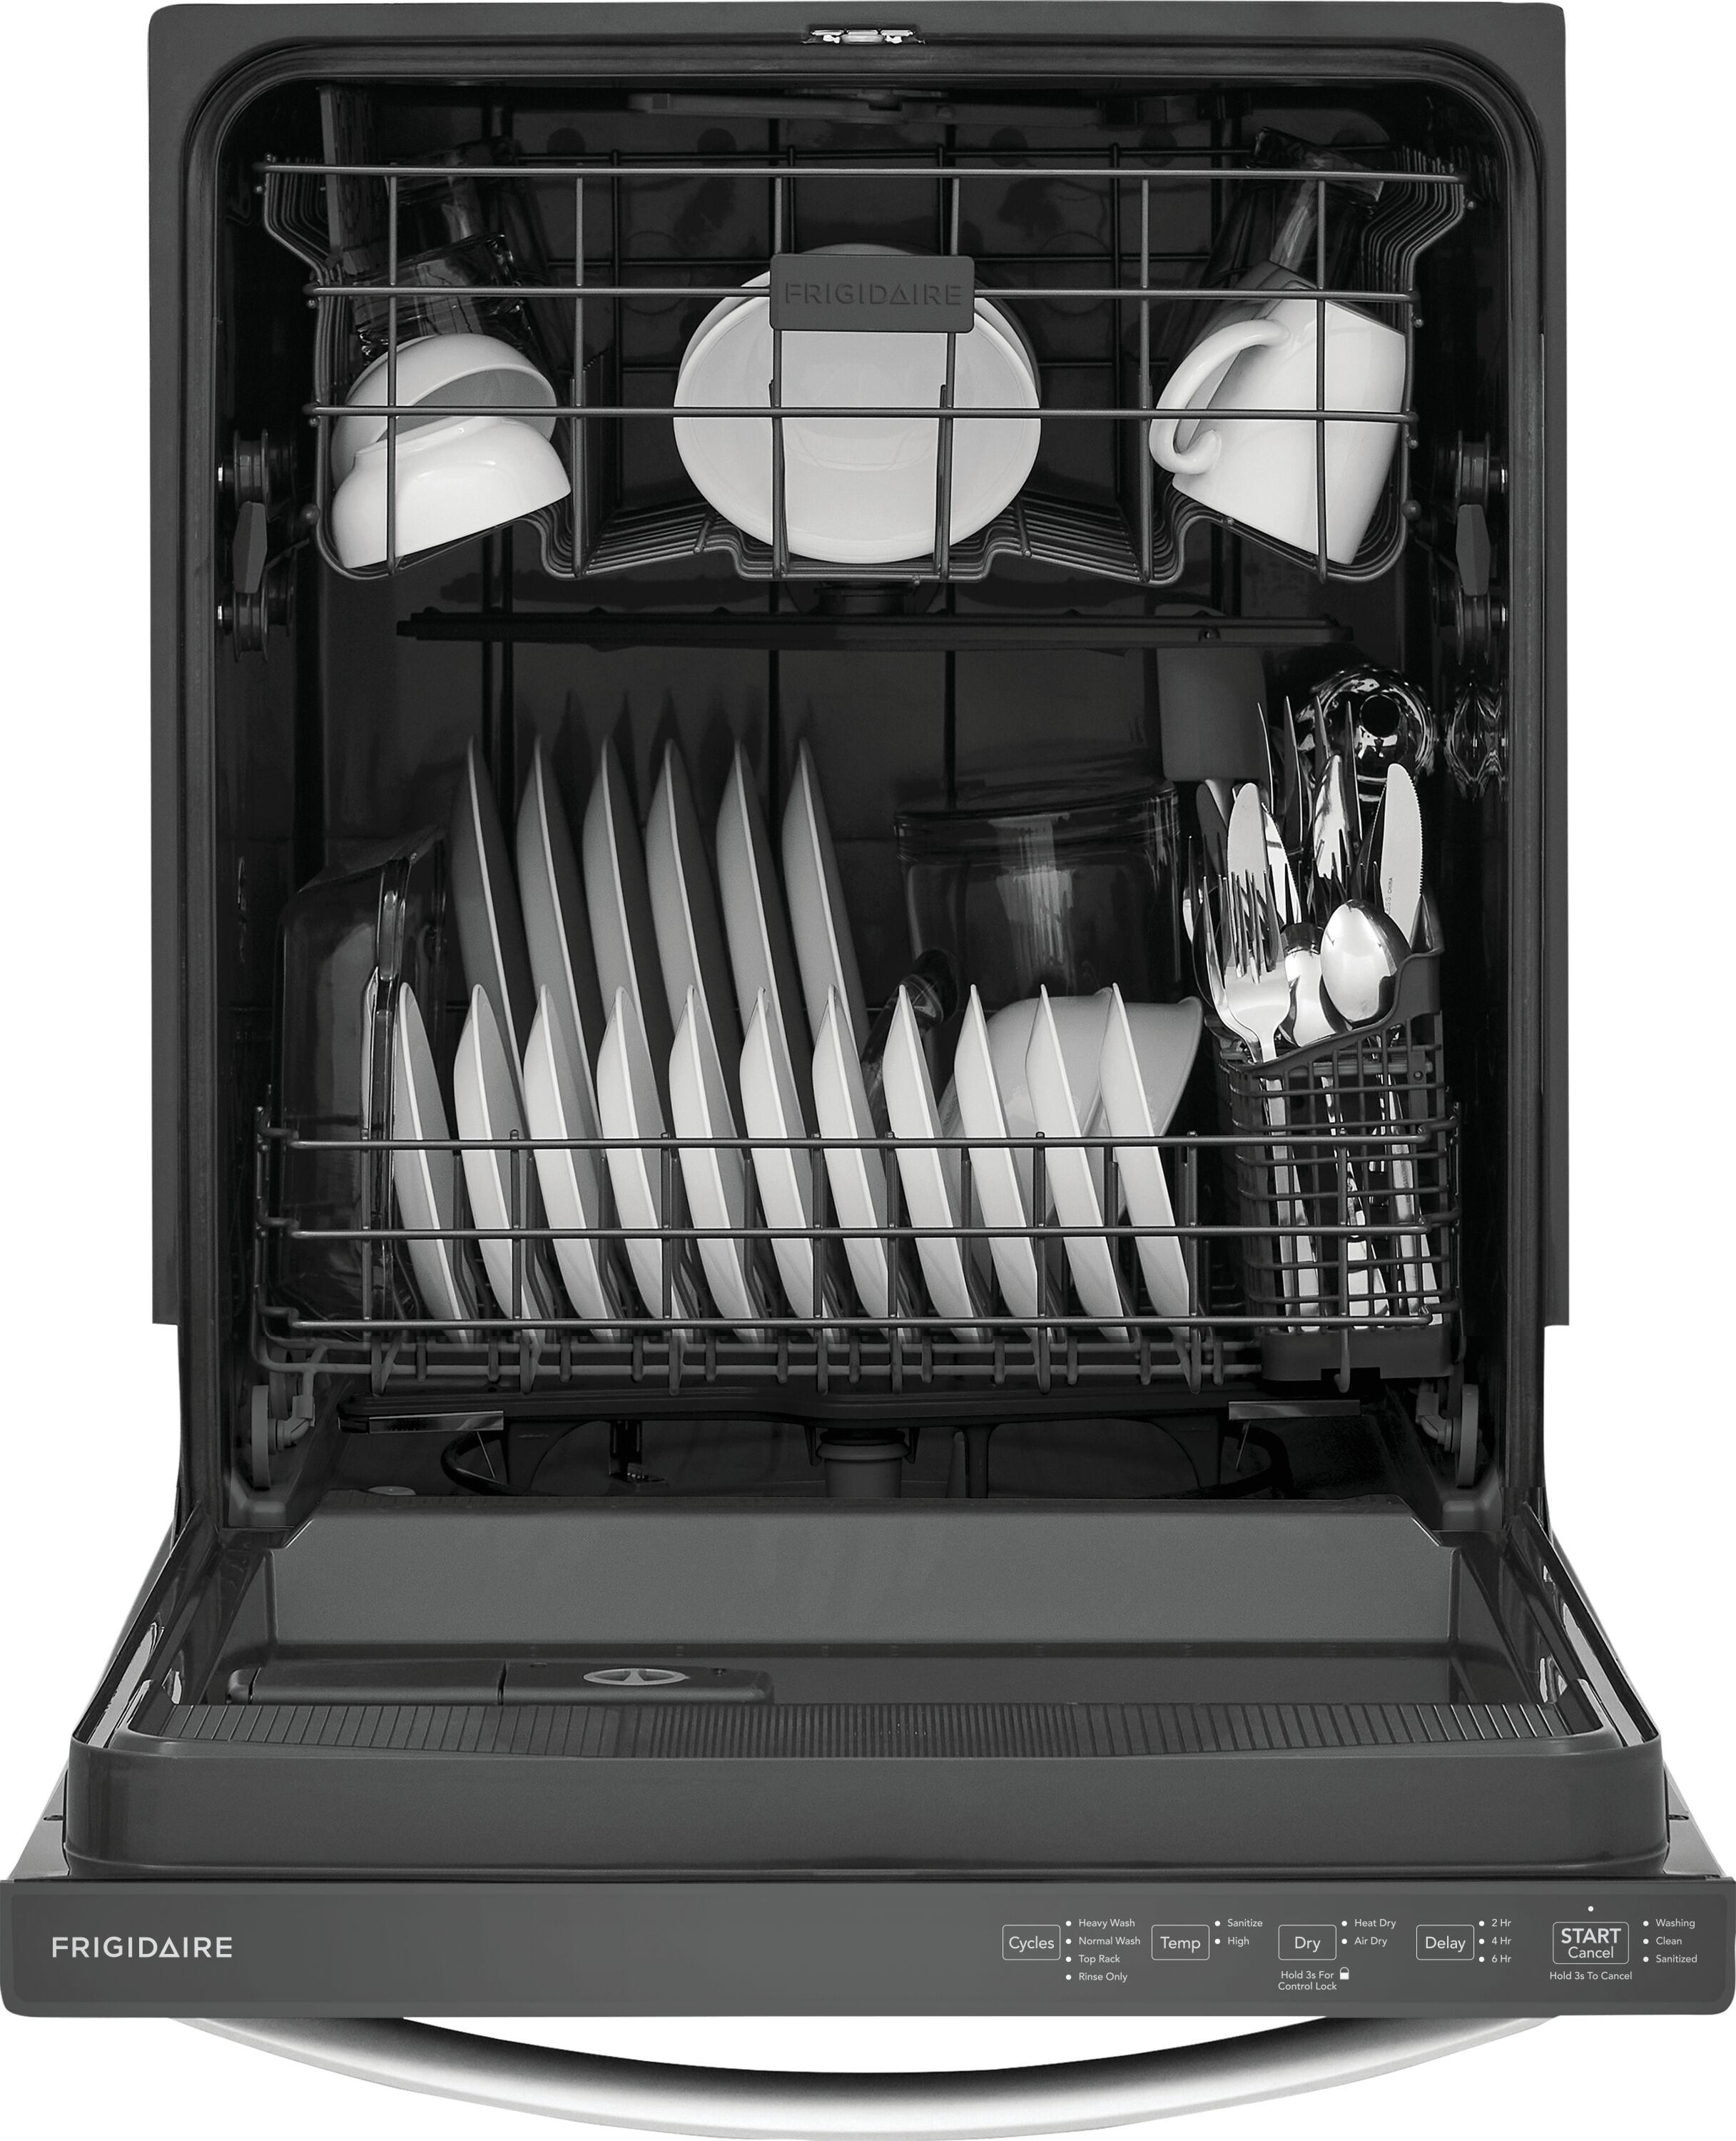 Lowes sold me a used dishwasher? : r/Appliances